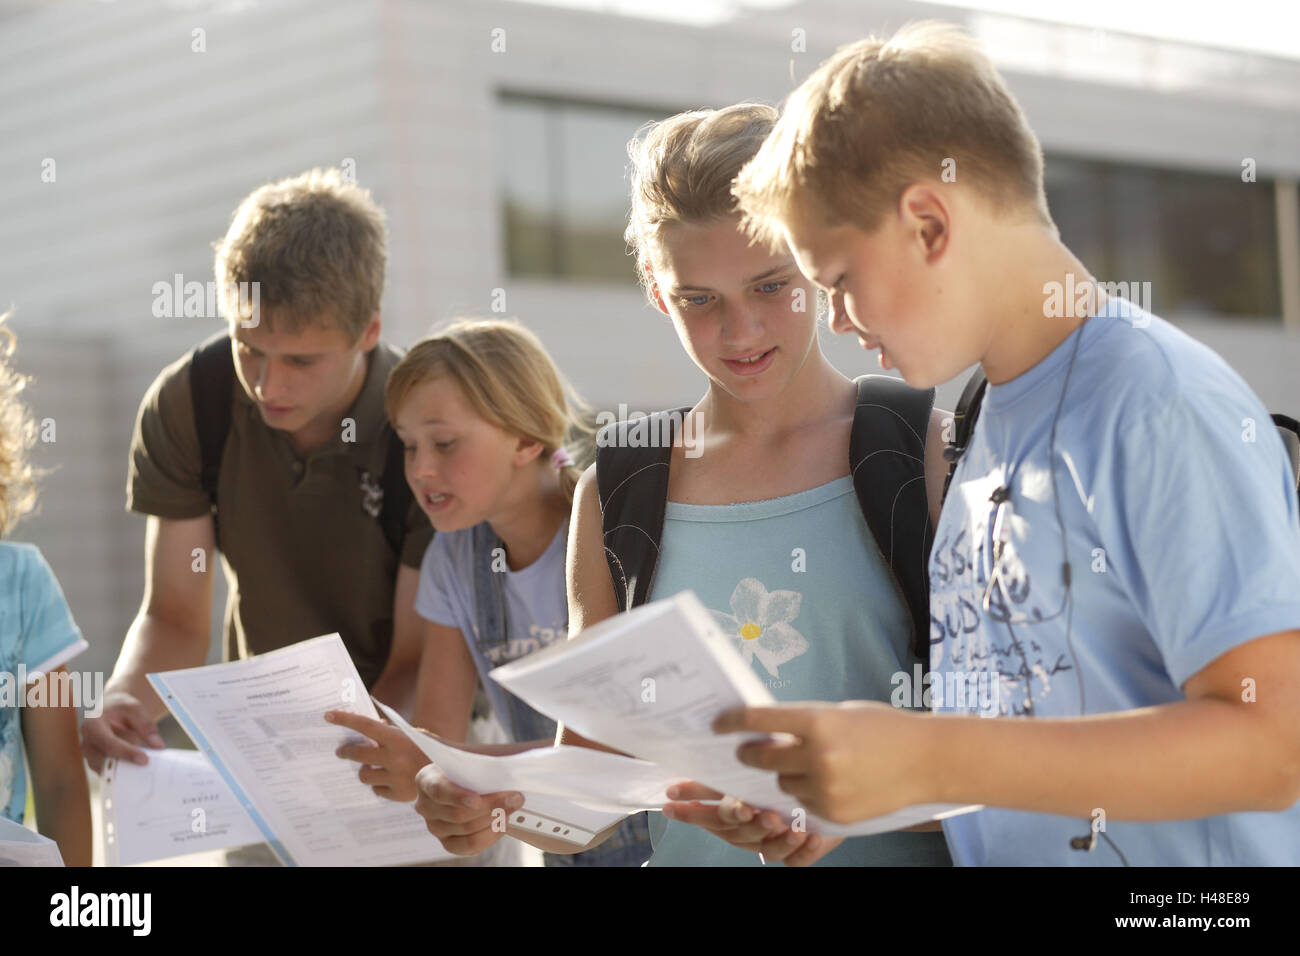 Pupils, reports, comparing, holding, showing, schoolyard, Stock Photo